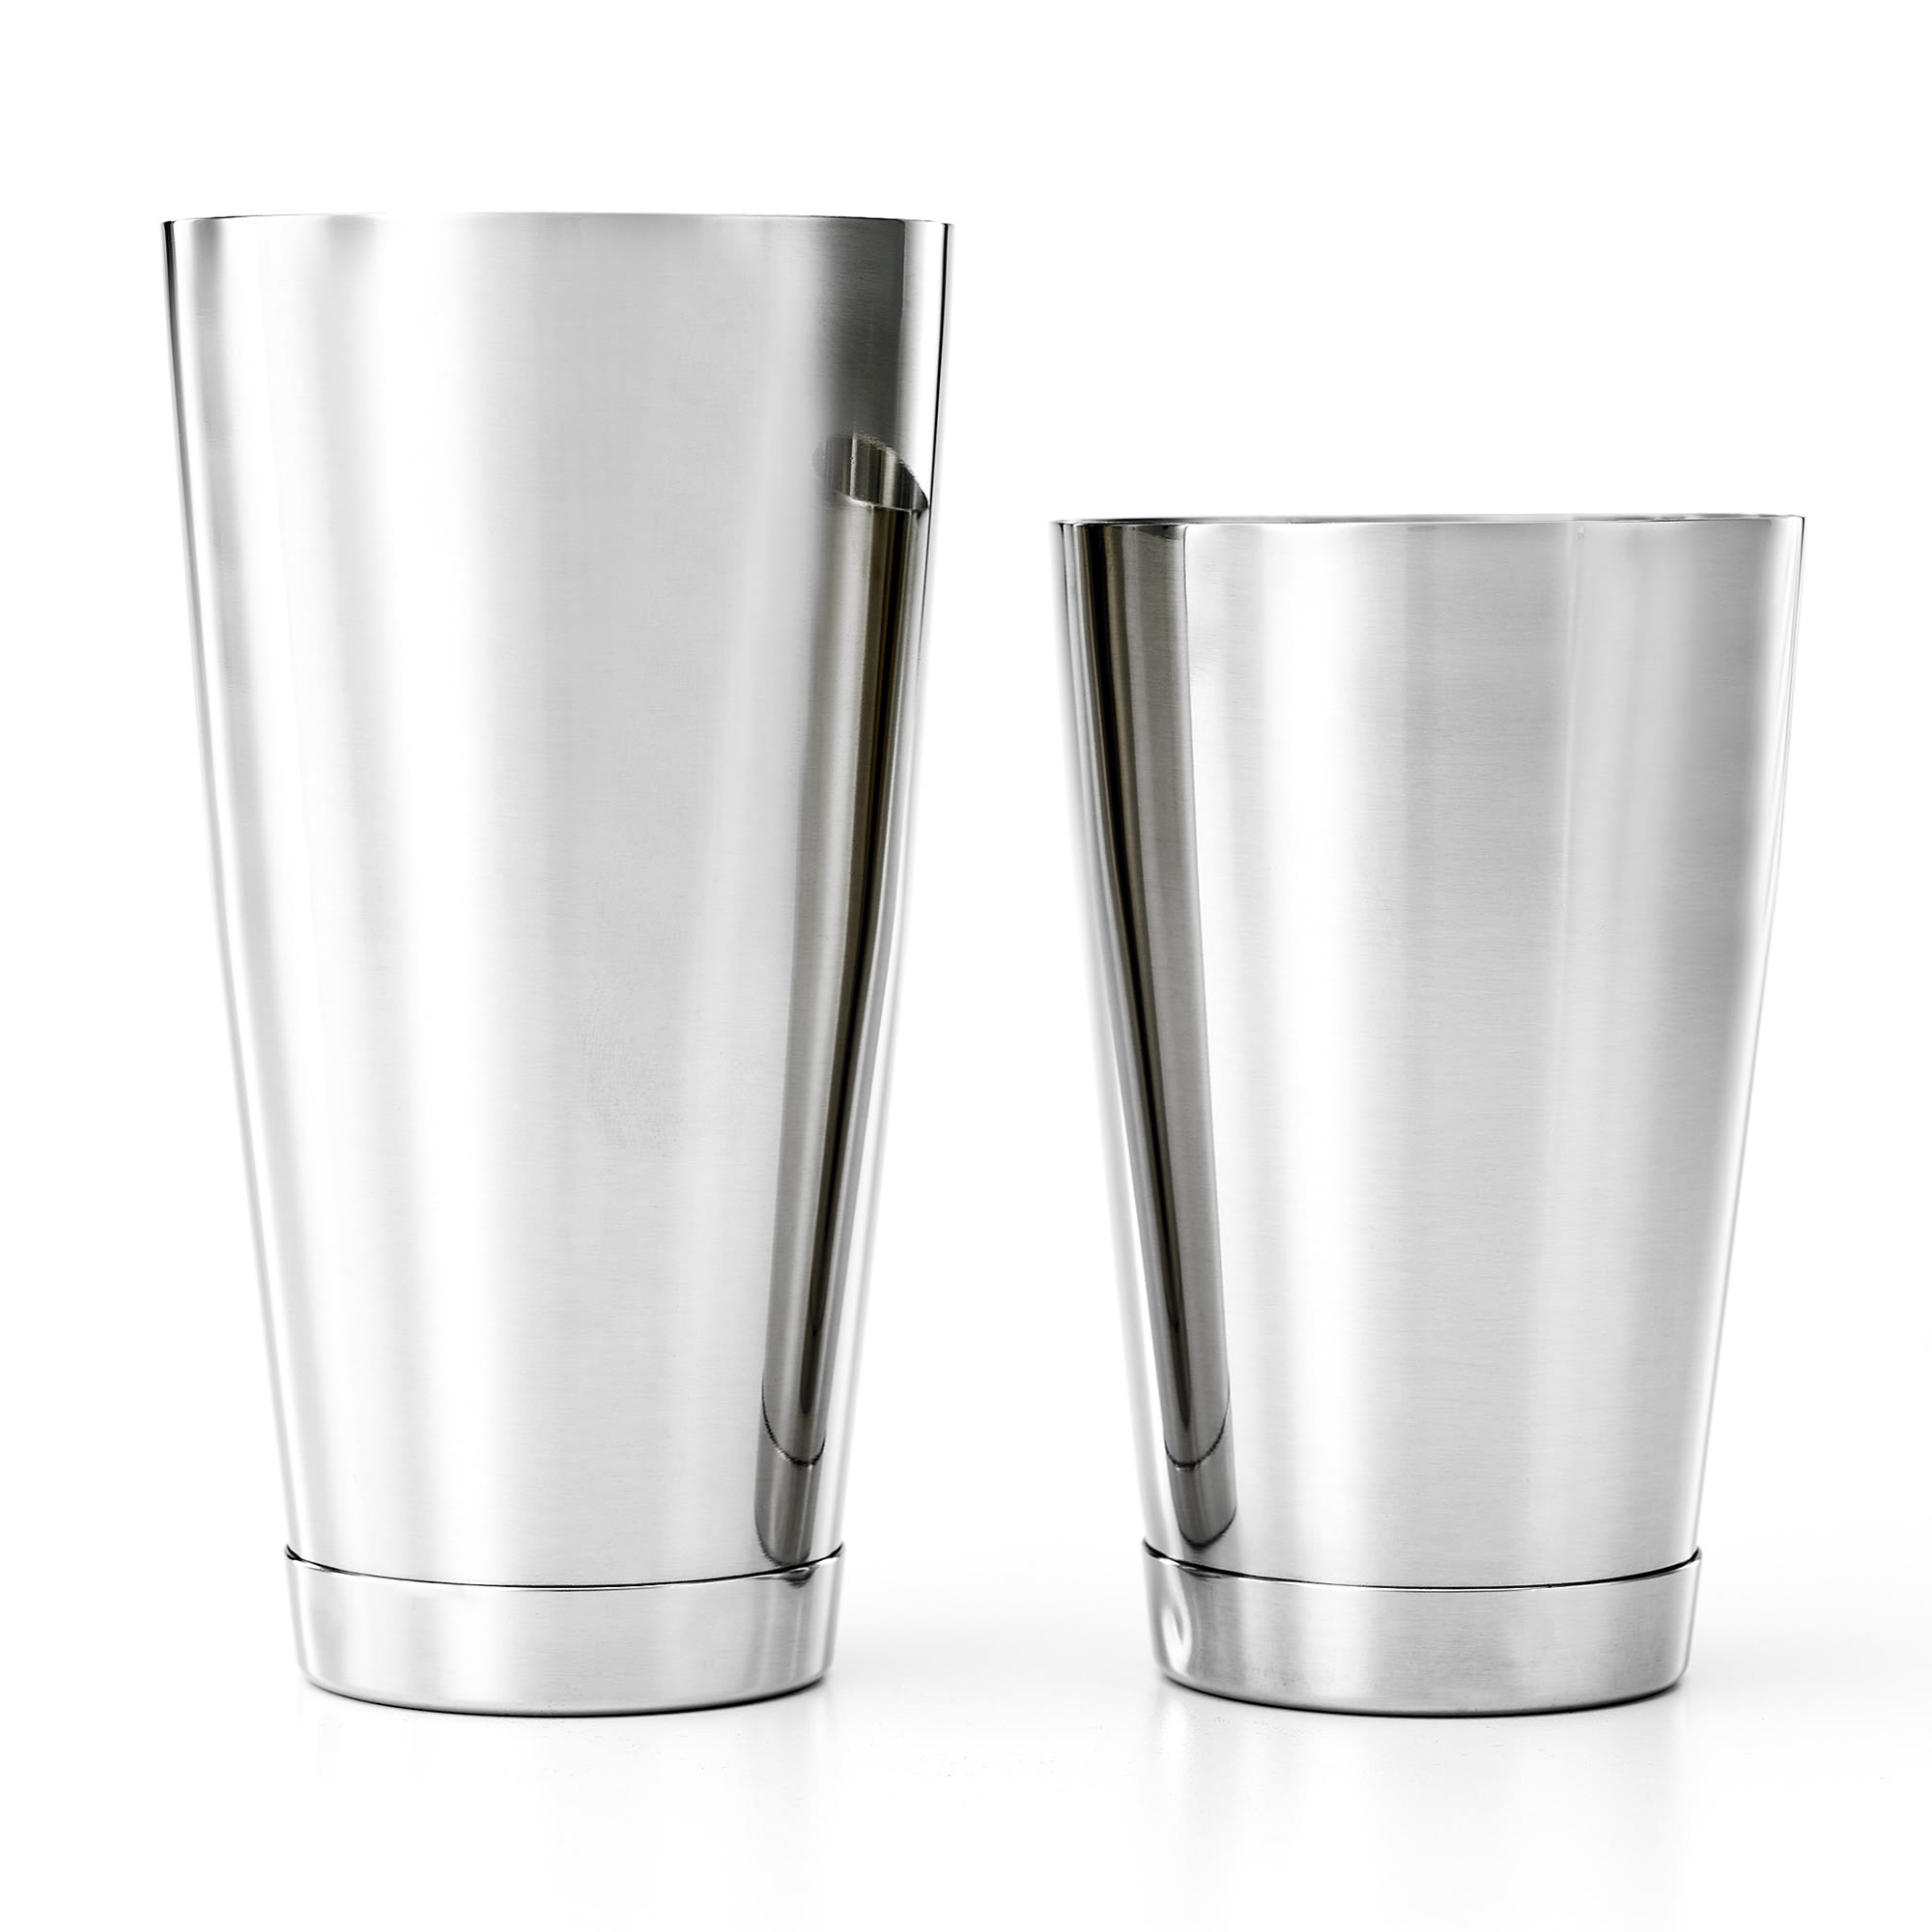 Barfly 19 oz. Double Wall Insulated 3-Piece Cocktail Shaker M37157